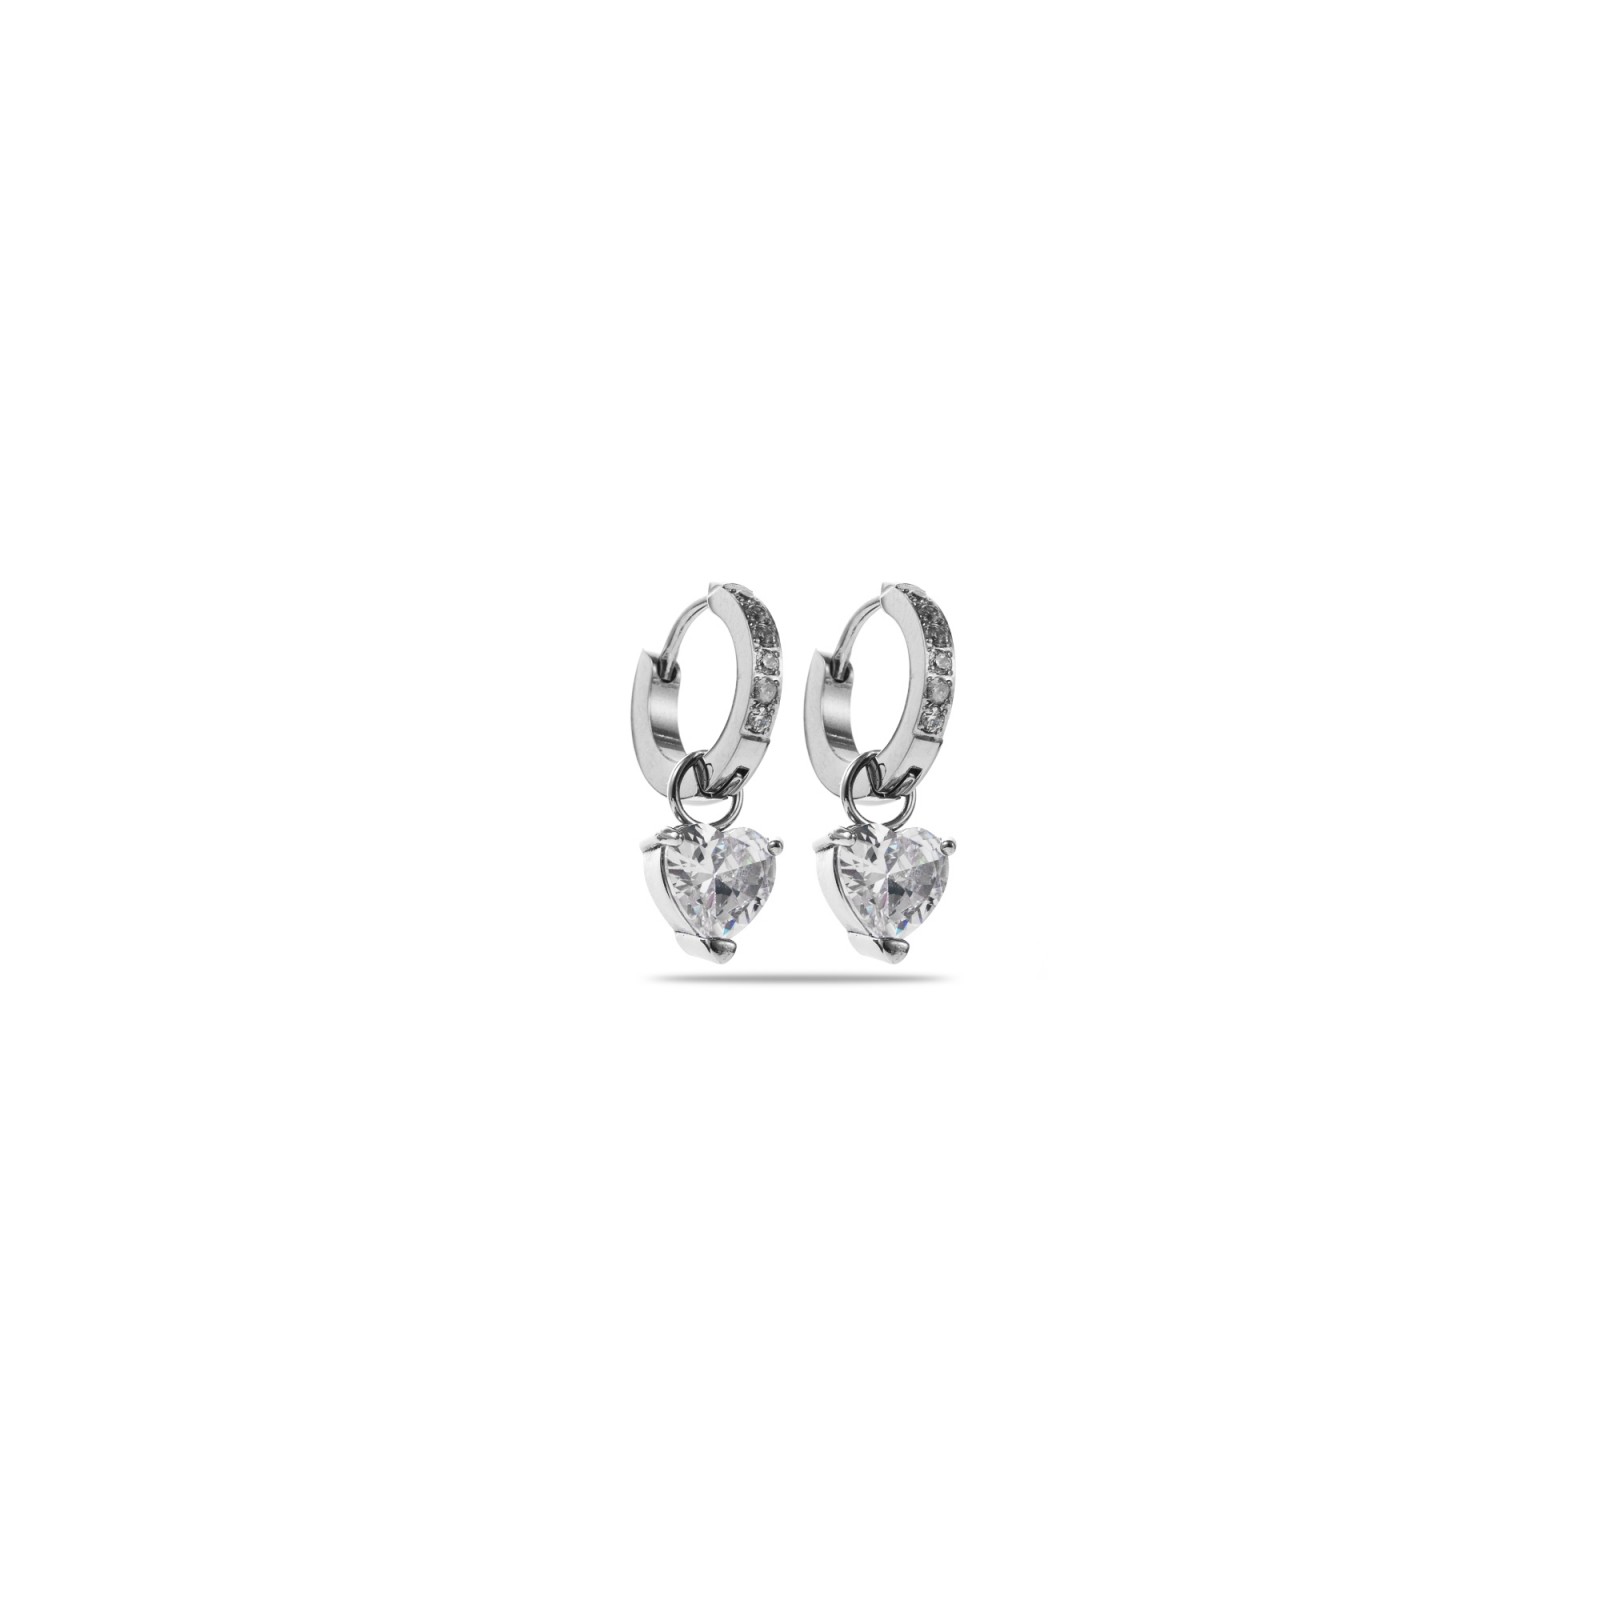 Stainless Steel Smart Earrings Color:Silver